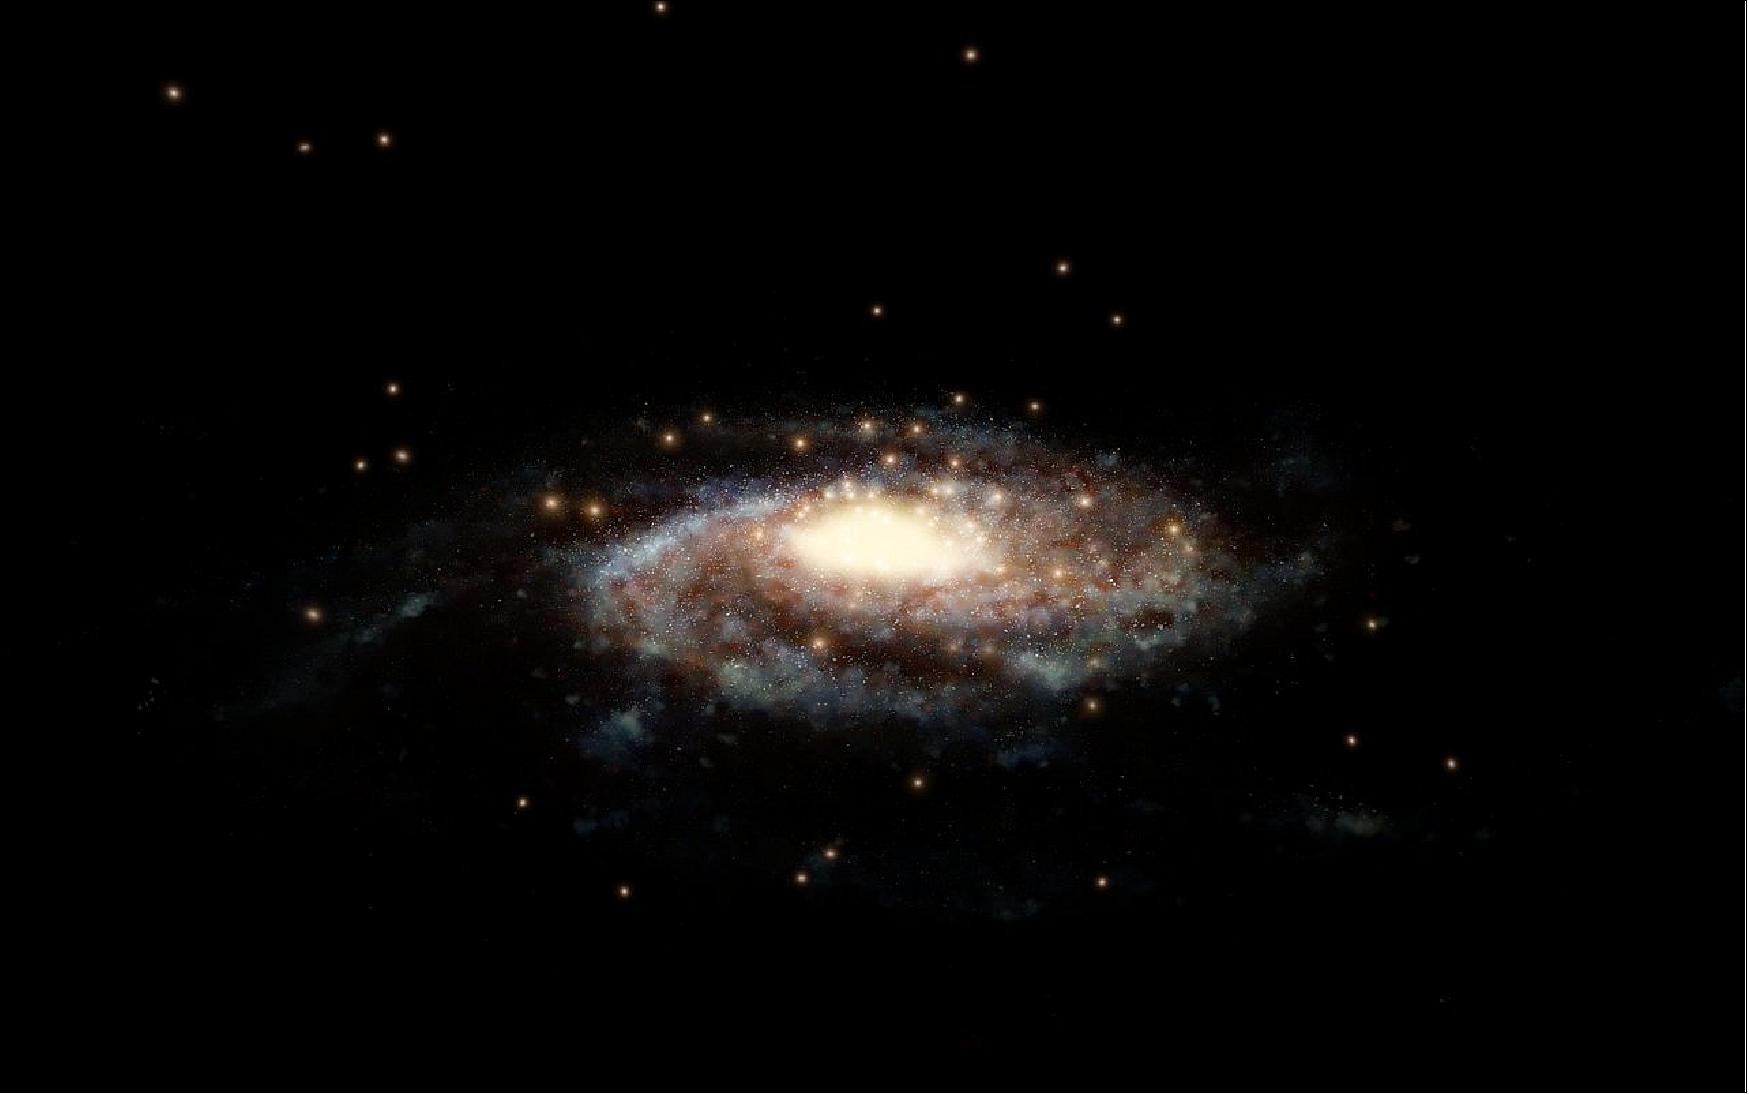 Figure 20: This artist's impression shows a computer generated model of the Milky Way and the accurate positions of the globular clusters used in this study surrounding it. Scientists used the measured velocities of these 44 globular clusters to determine the total mass of the Milky Way, our cosmic home. Satellite: Hubble Space Telescope (image credit: ESA/Hubble, NASA, L. Calçada)